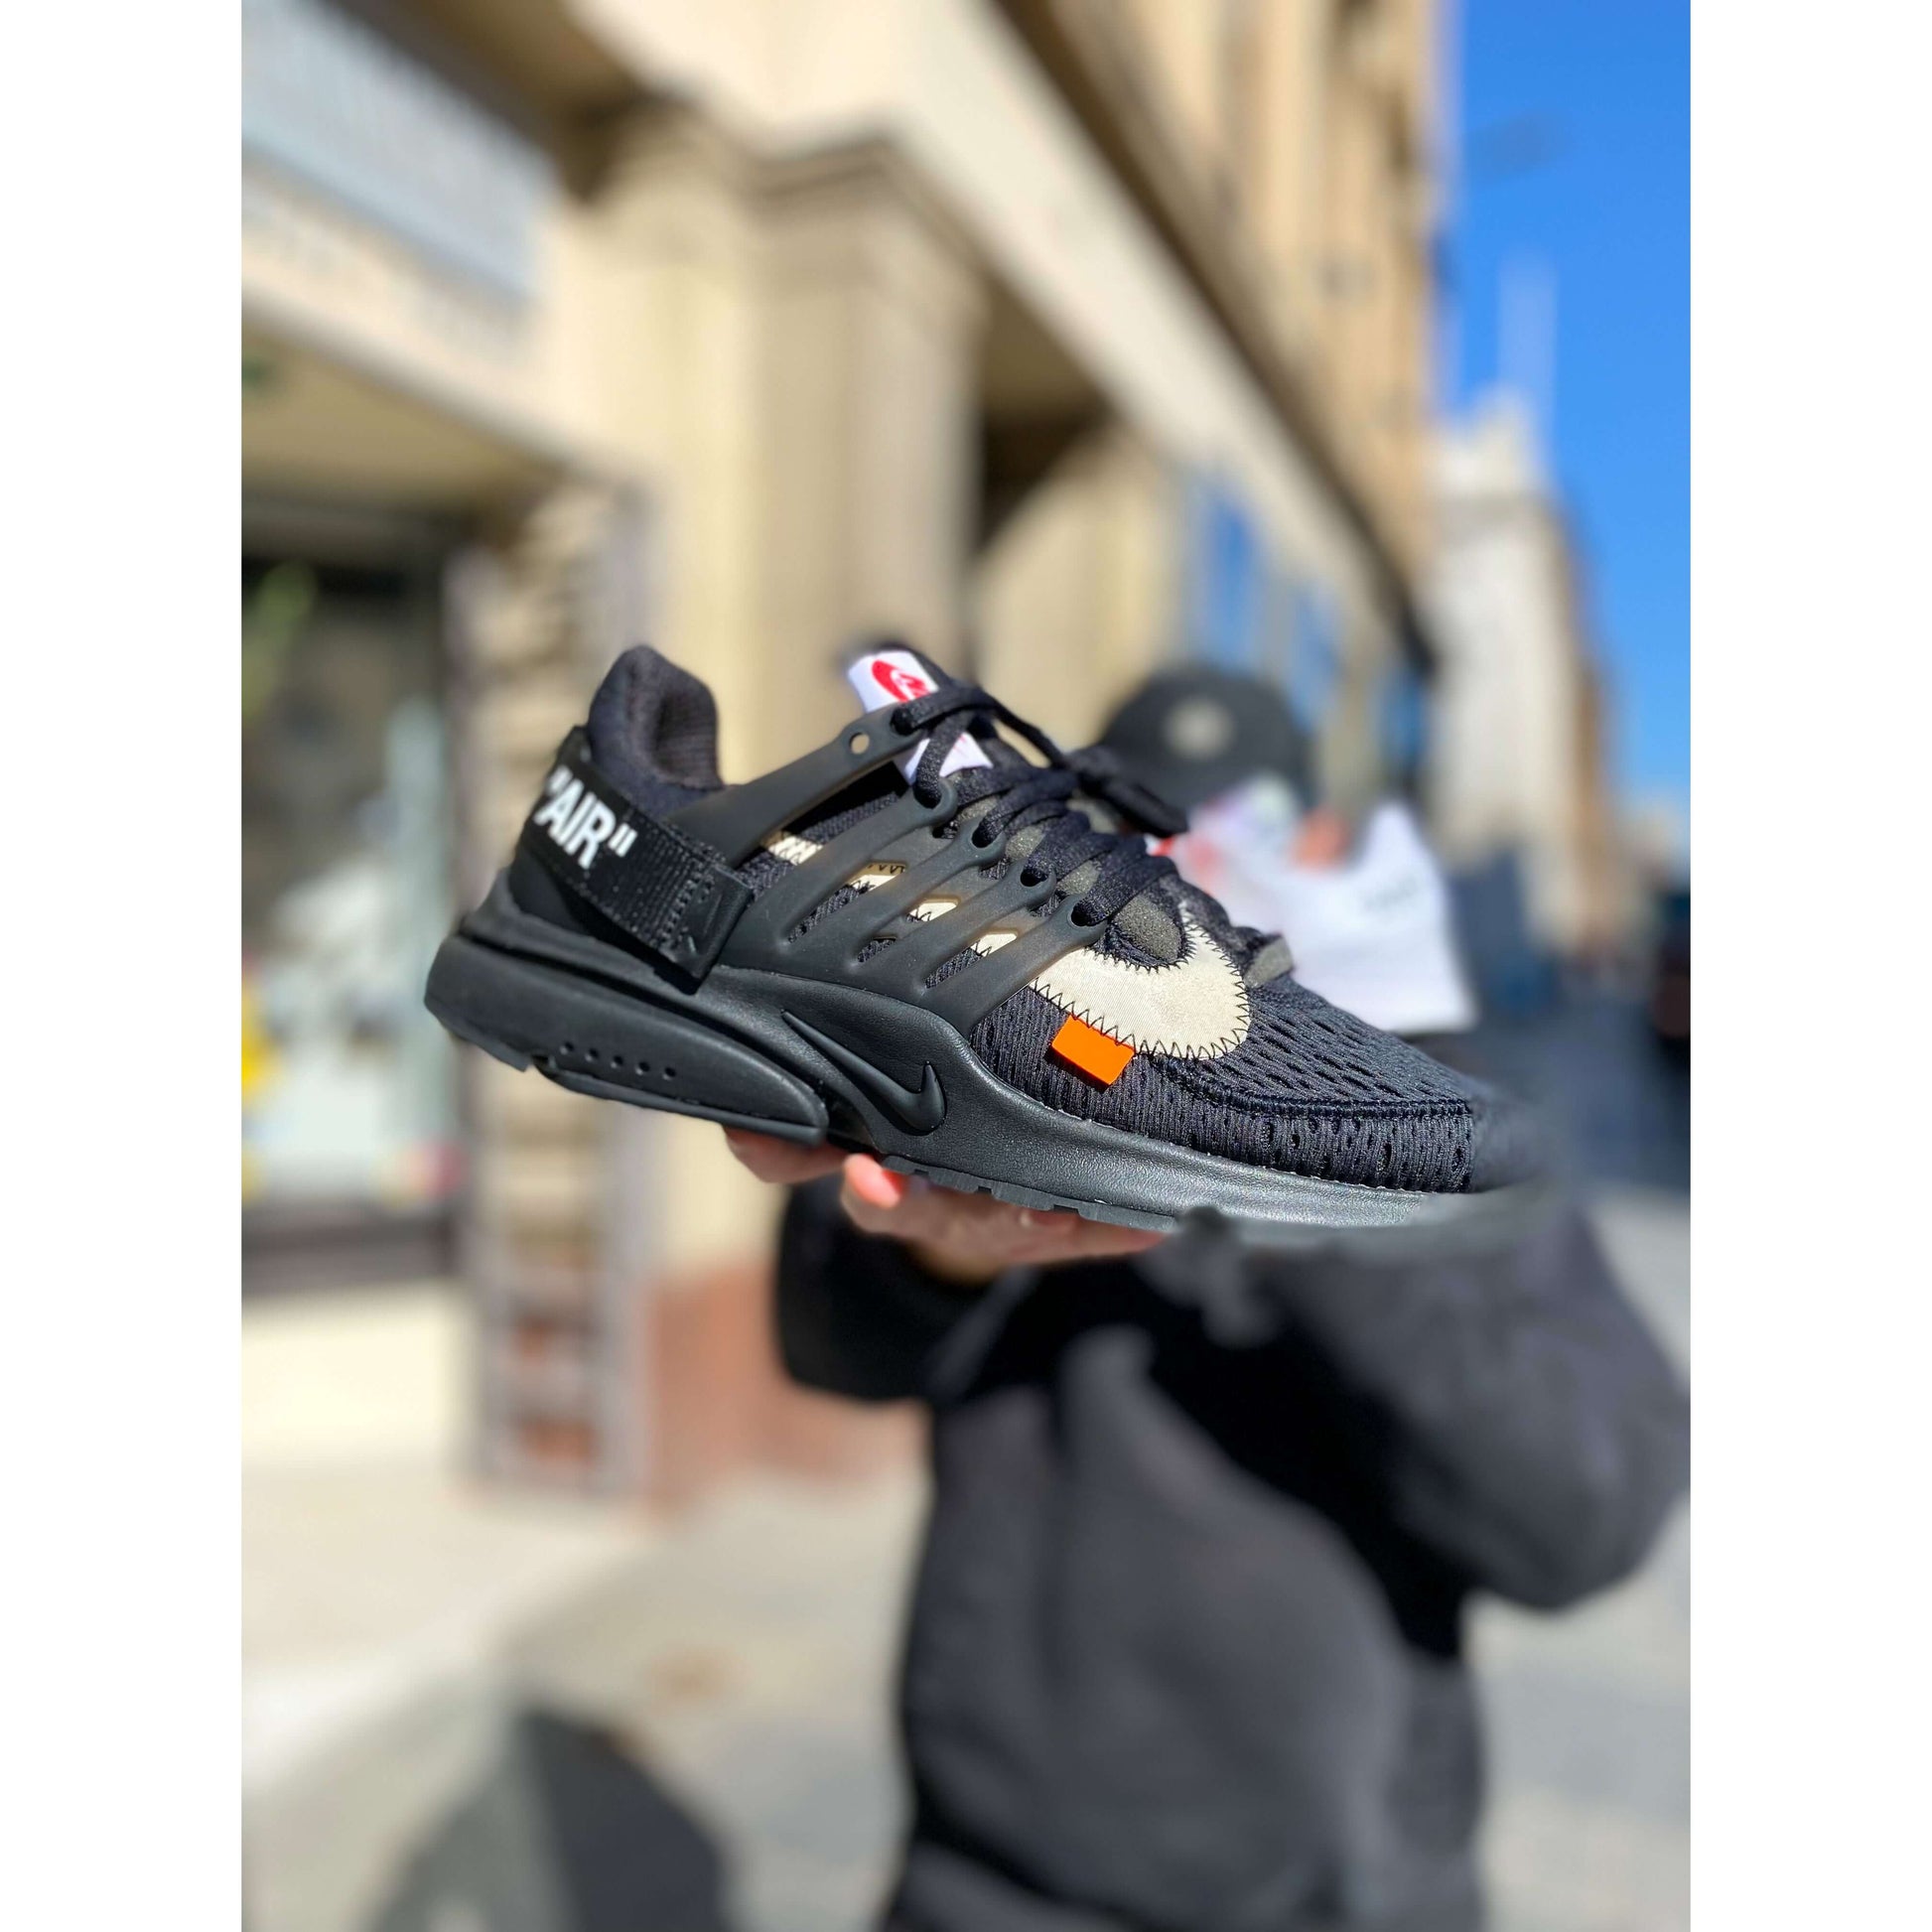 Air Presto Off-White Black (2018) by Nike from £1050.00